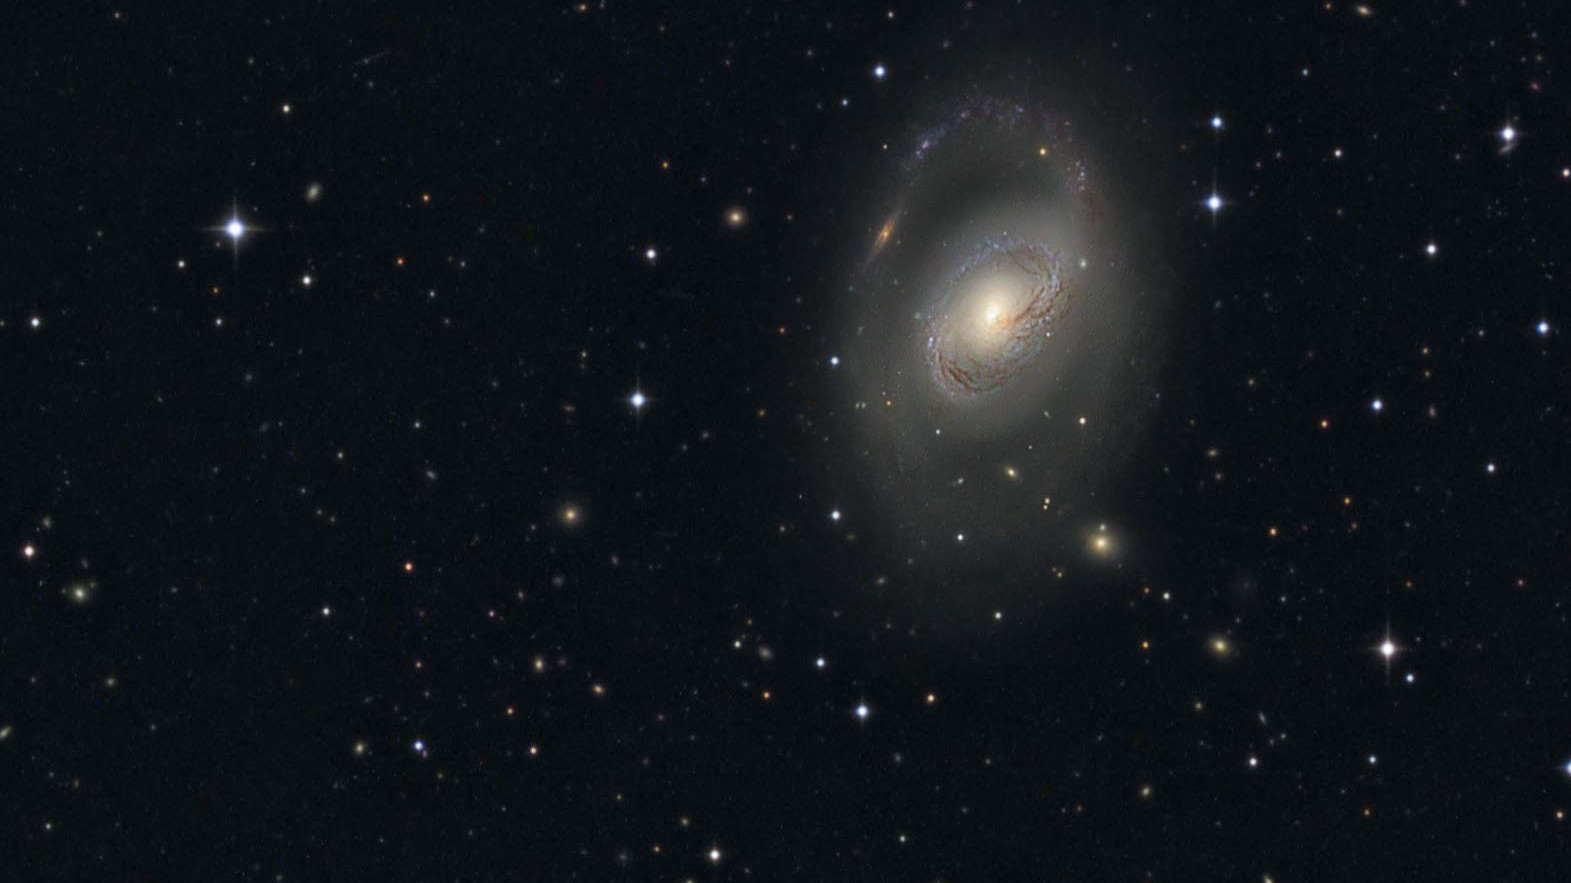 Two sister galaxies